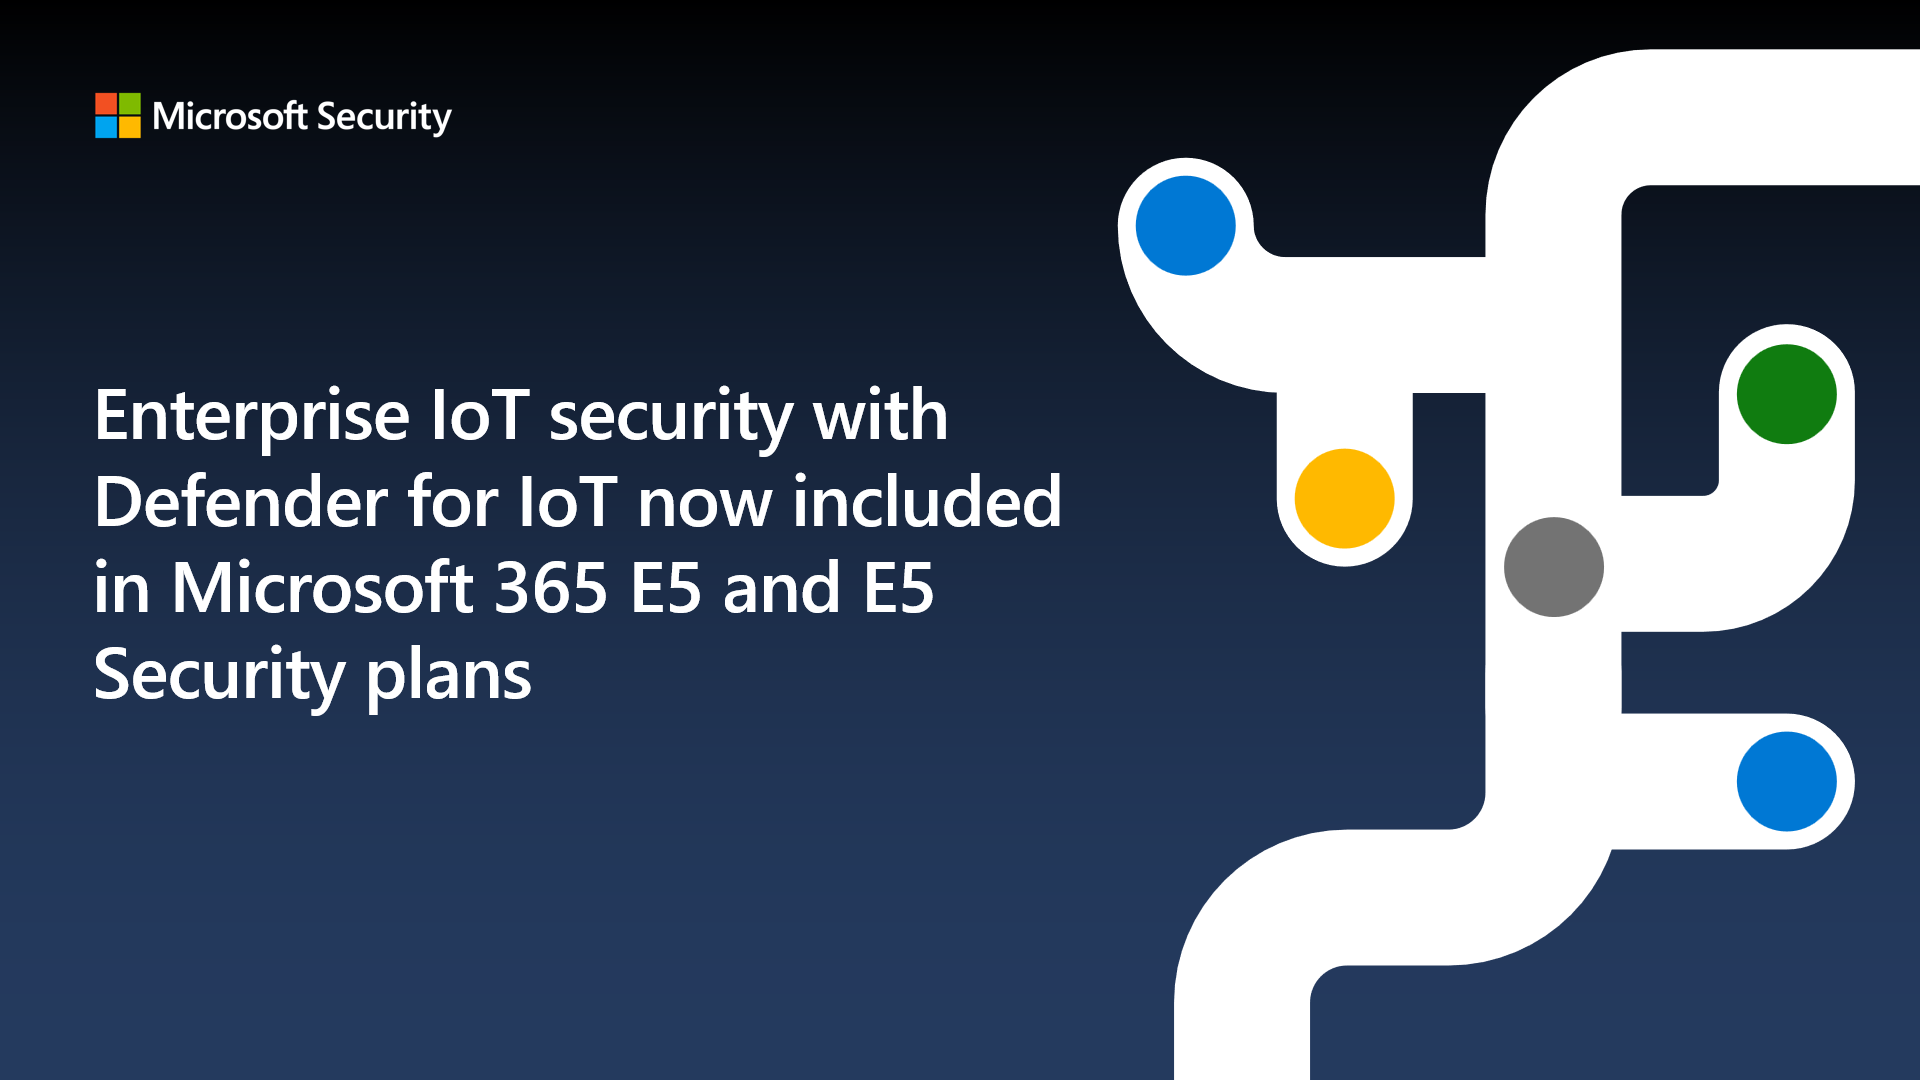 Enterprise IoT security with Defender for IoT now included in Microsoft 365 E5 and E5 Security plans